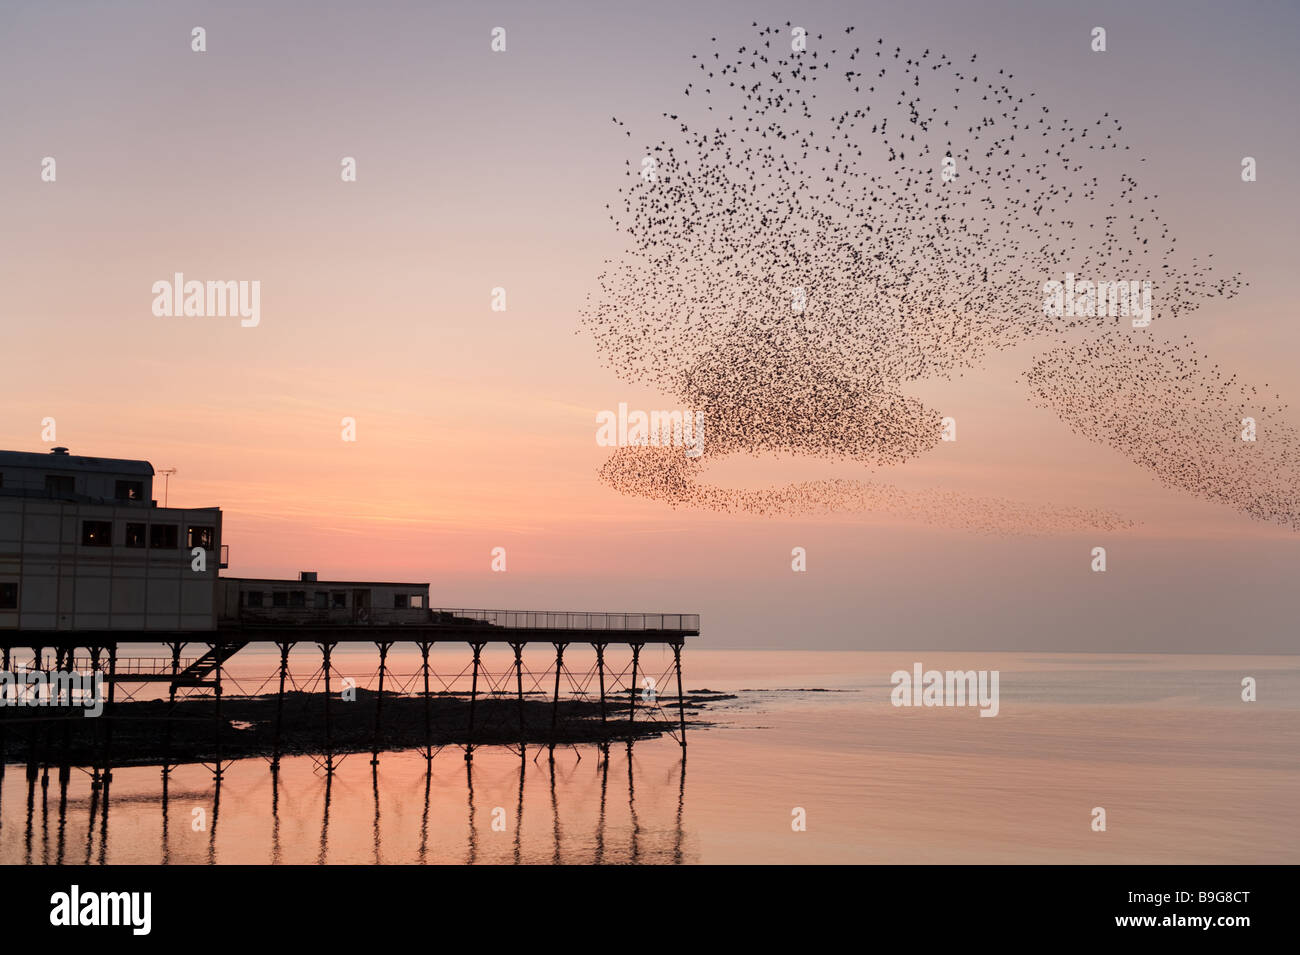 A flock of Starlings roosting at dusk Aberystwyth Pier Wales UK Stock Photo